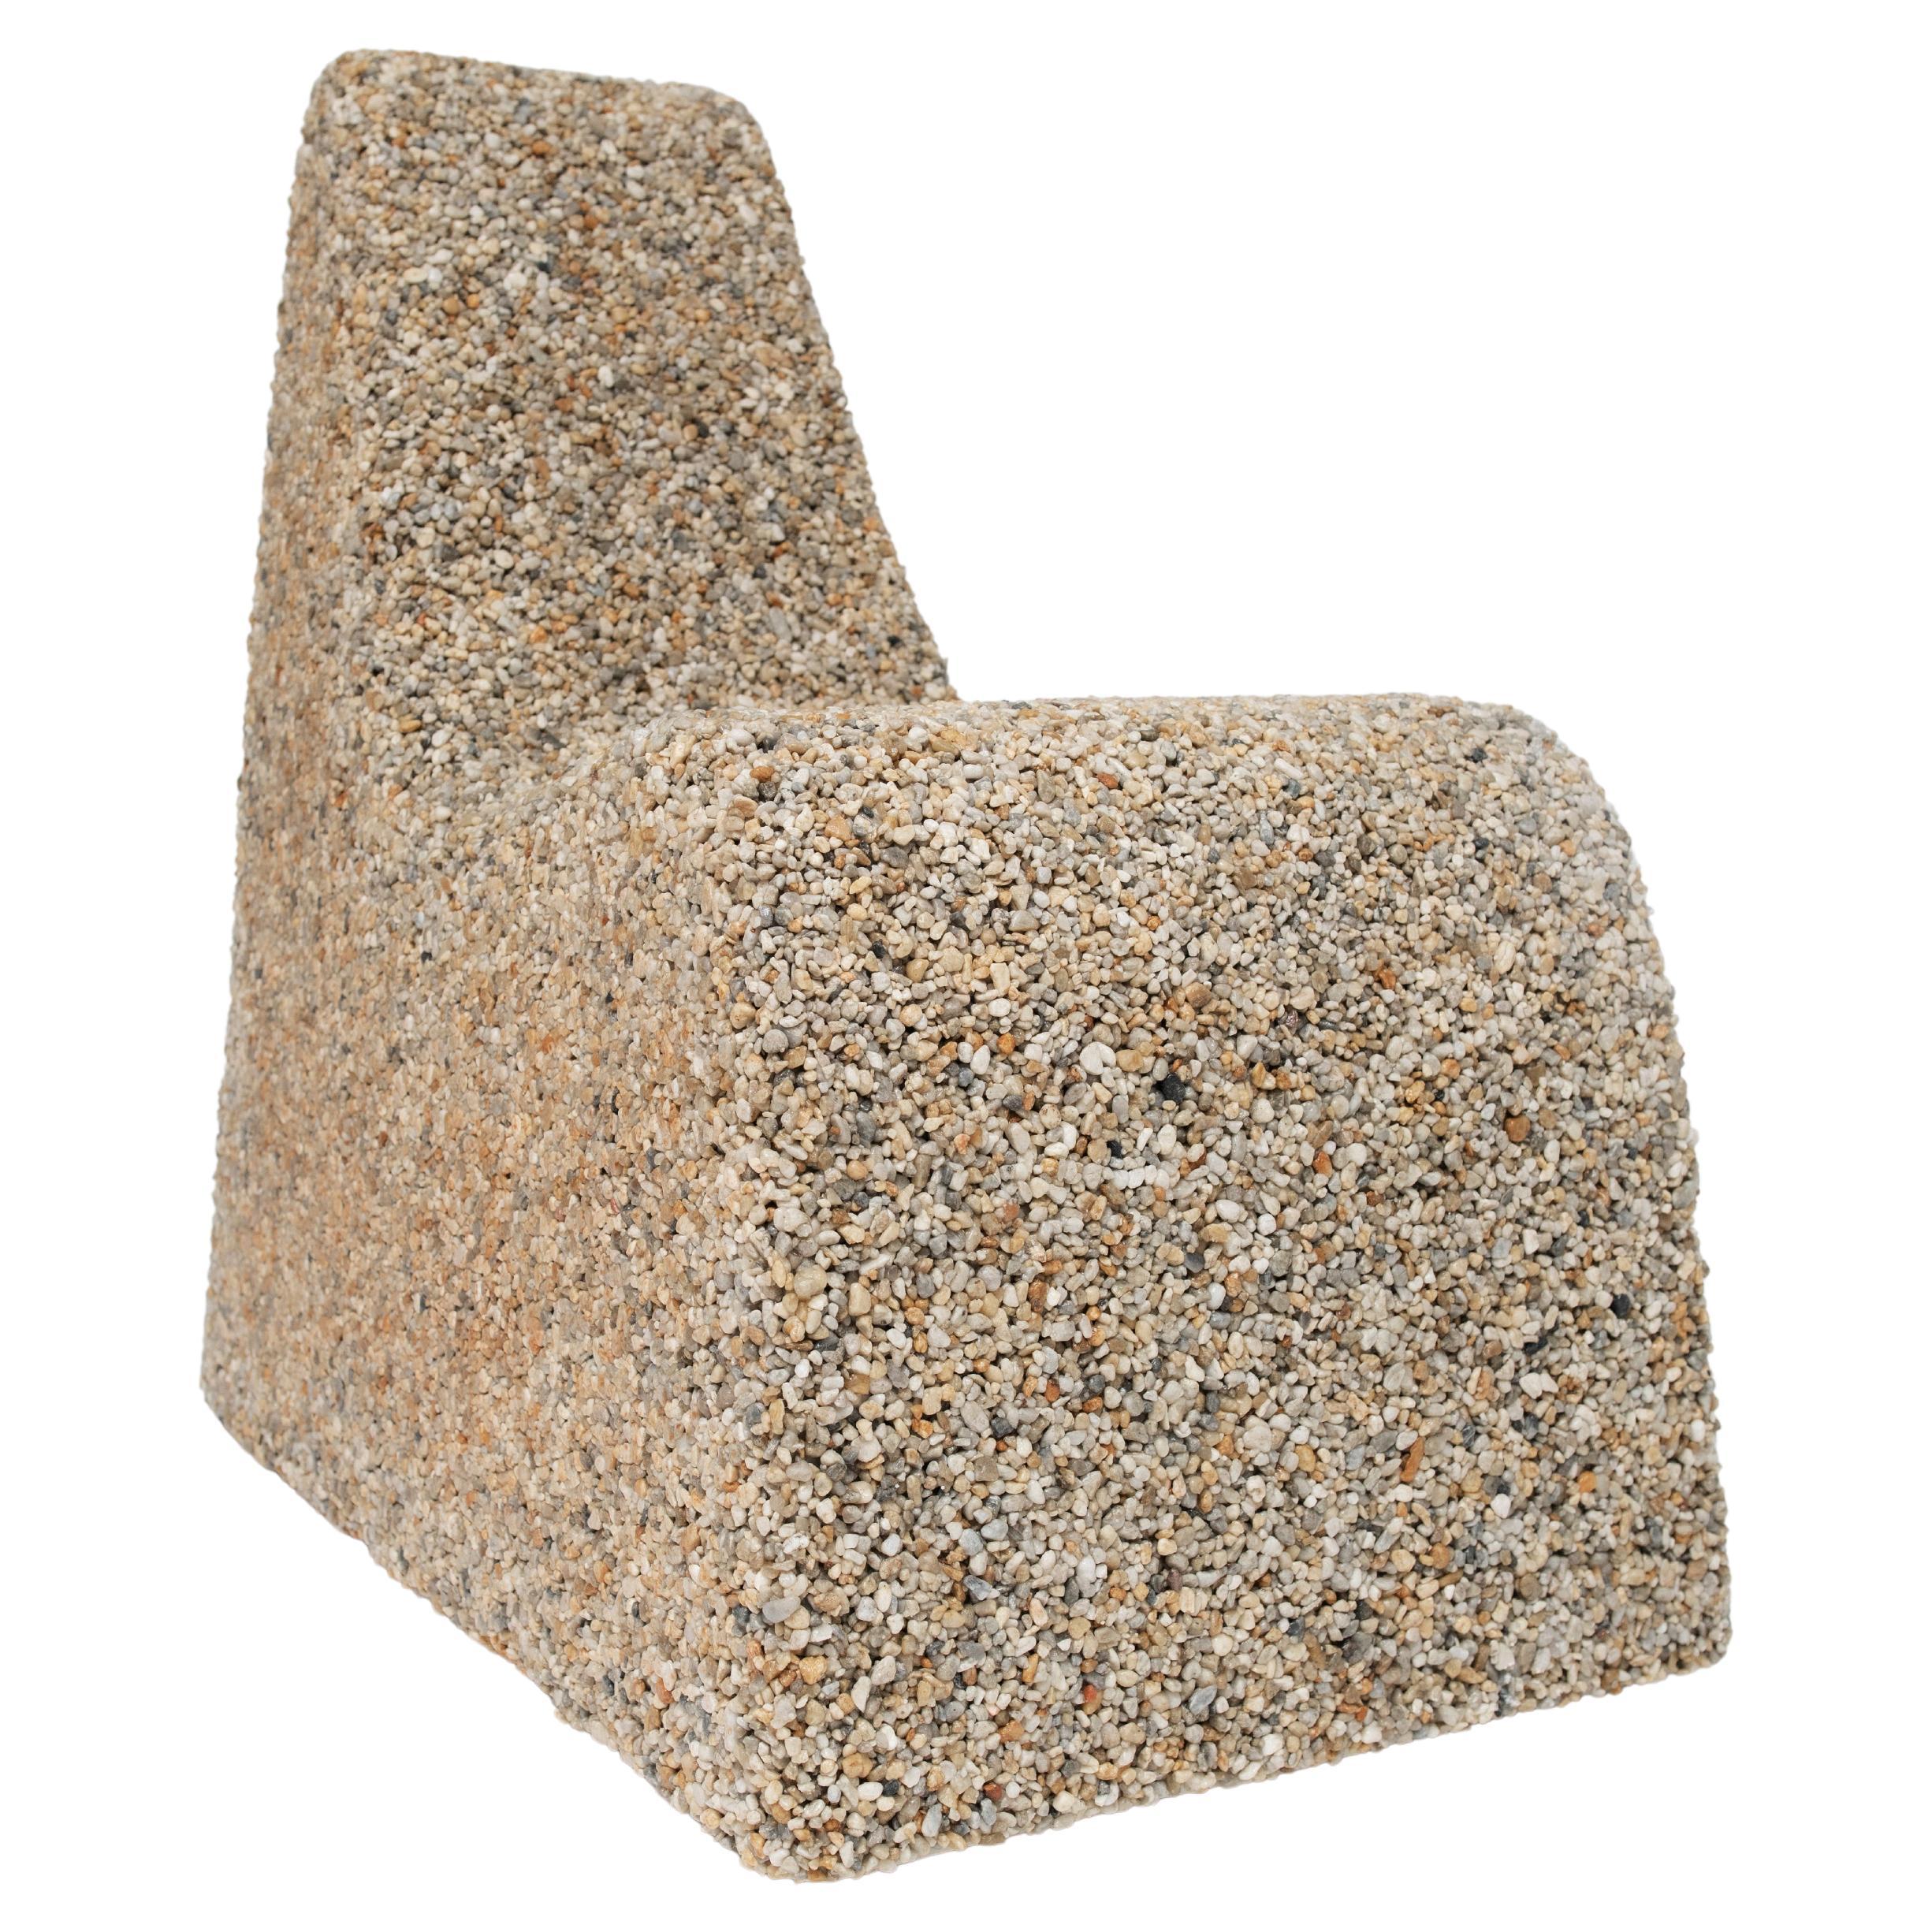 Gravel Chair For Sale